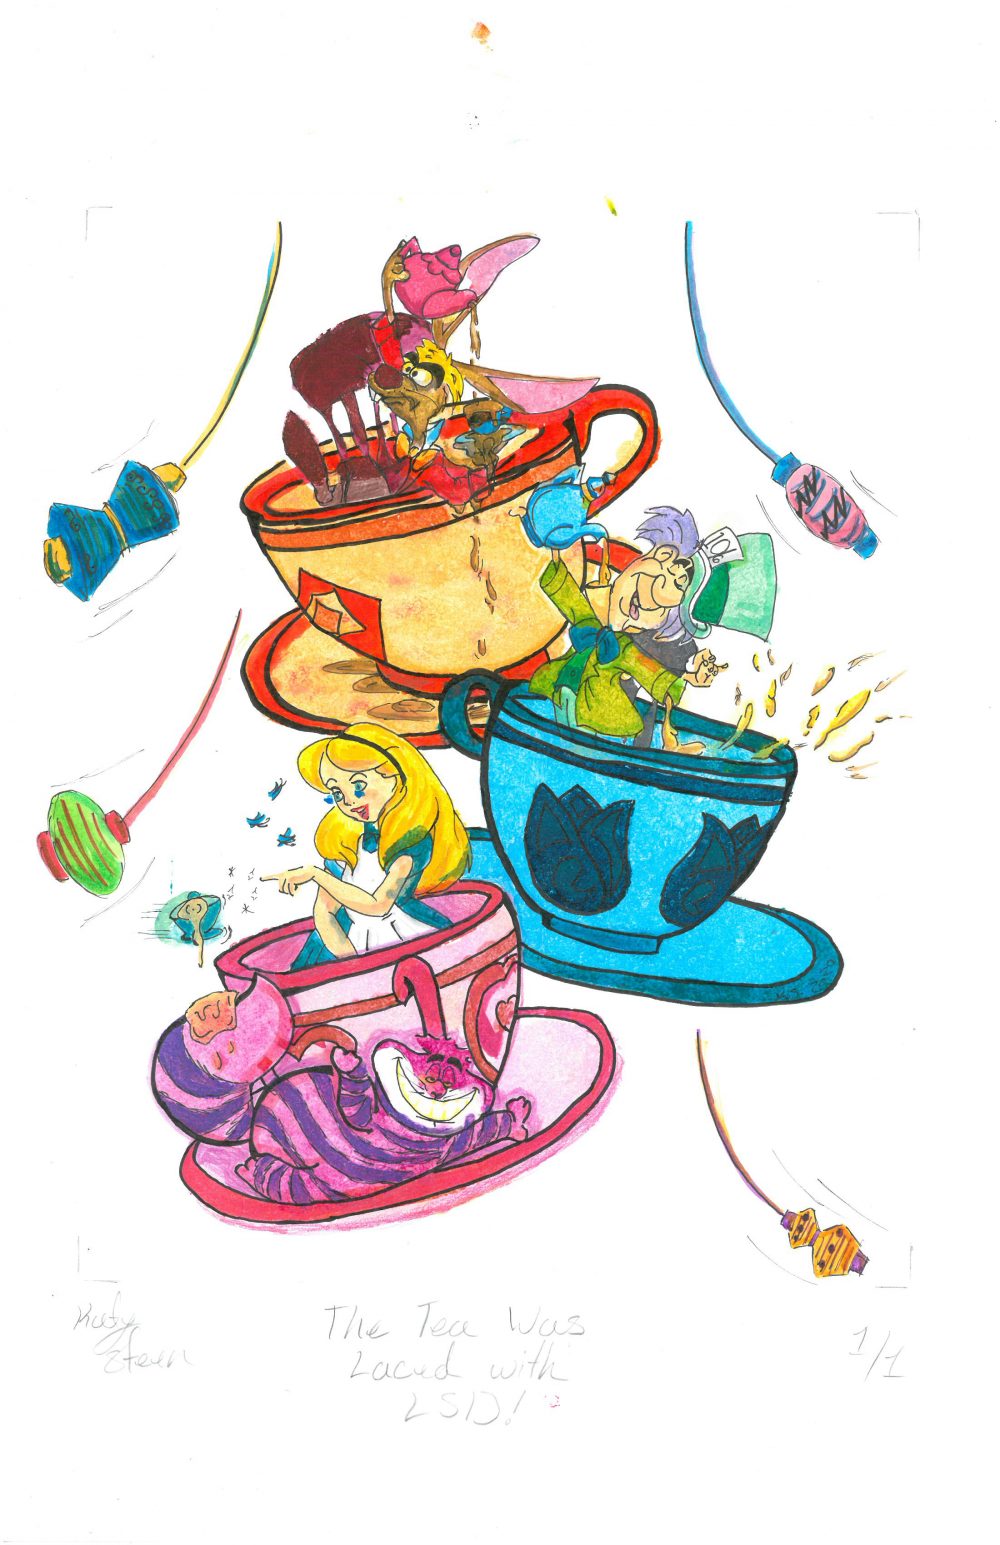 Alice in wonderlands Mad Tea Party, the march hair is pouring tea between his big floppy ears and its overflowing out of his tiny teacup, onto the saucer of the much larger orange teacup that he's sitting " while the Mad Hatter is sticking his tong out in a tongue and cheek kind of way, while poring his tea down the neck of his green jacket, out his right sleeve and into the giant blue teacup he's sitting in and it's splashing up over the sides of the tea cups. while Alice is looking teary eyed and she's tormenting the Cheshire Cat by dumbing her magically levitating tea all over his pink and purple striped tail.